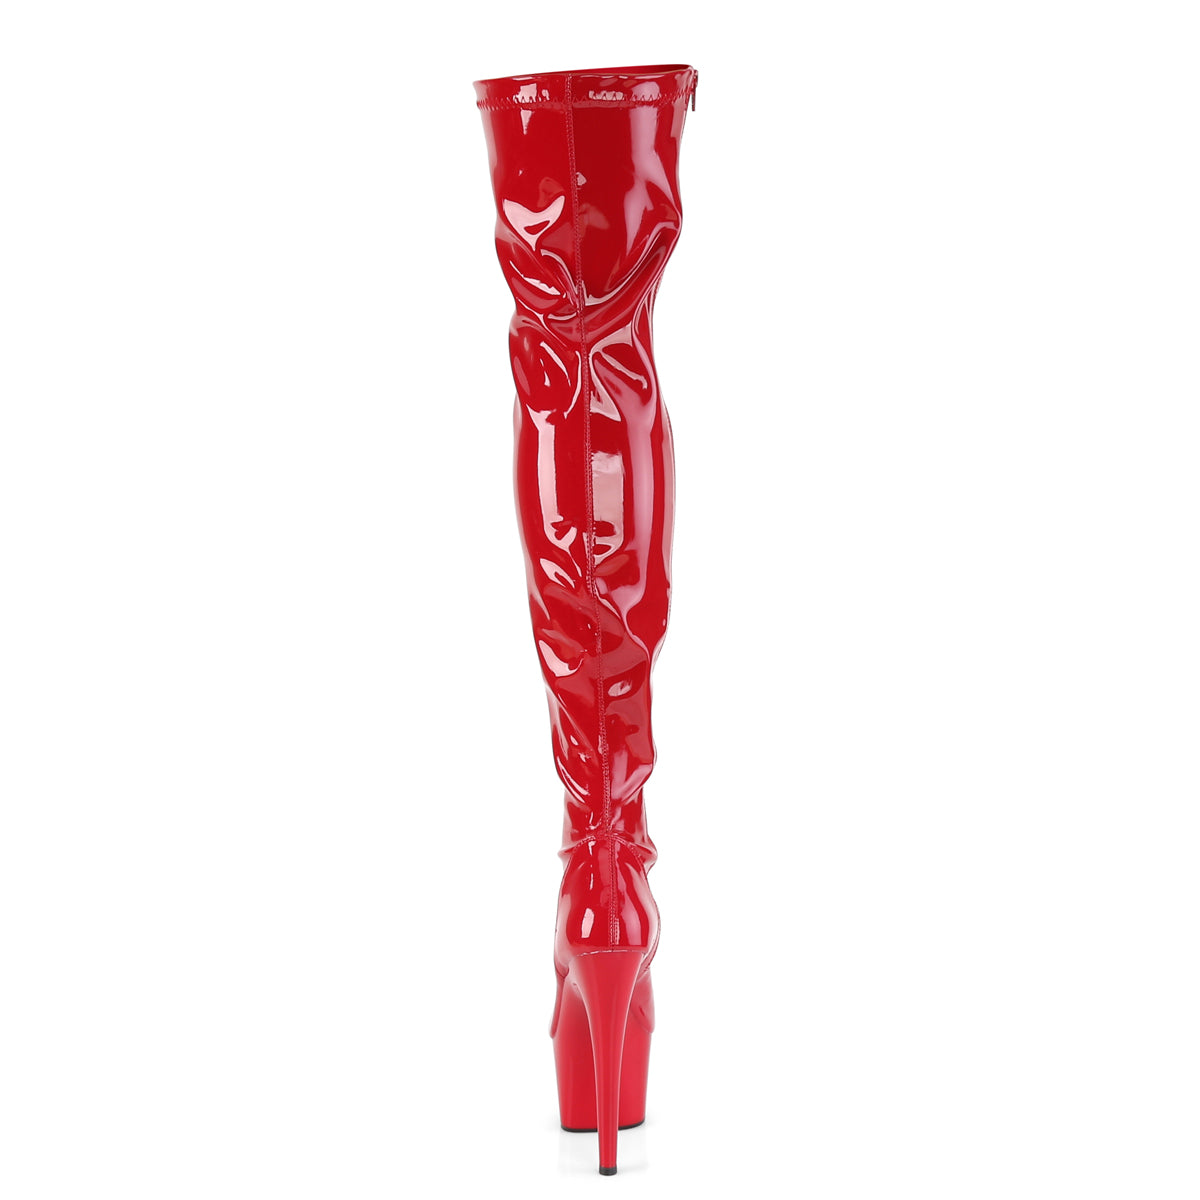 ADORE-3000 Pleaser 7 Inch Heel Red Pole Dancing Thigh Highs-Pleaser- Sexy Shoes Fetish Footwear